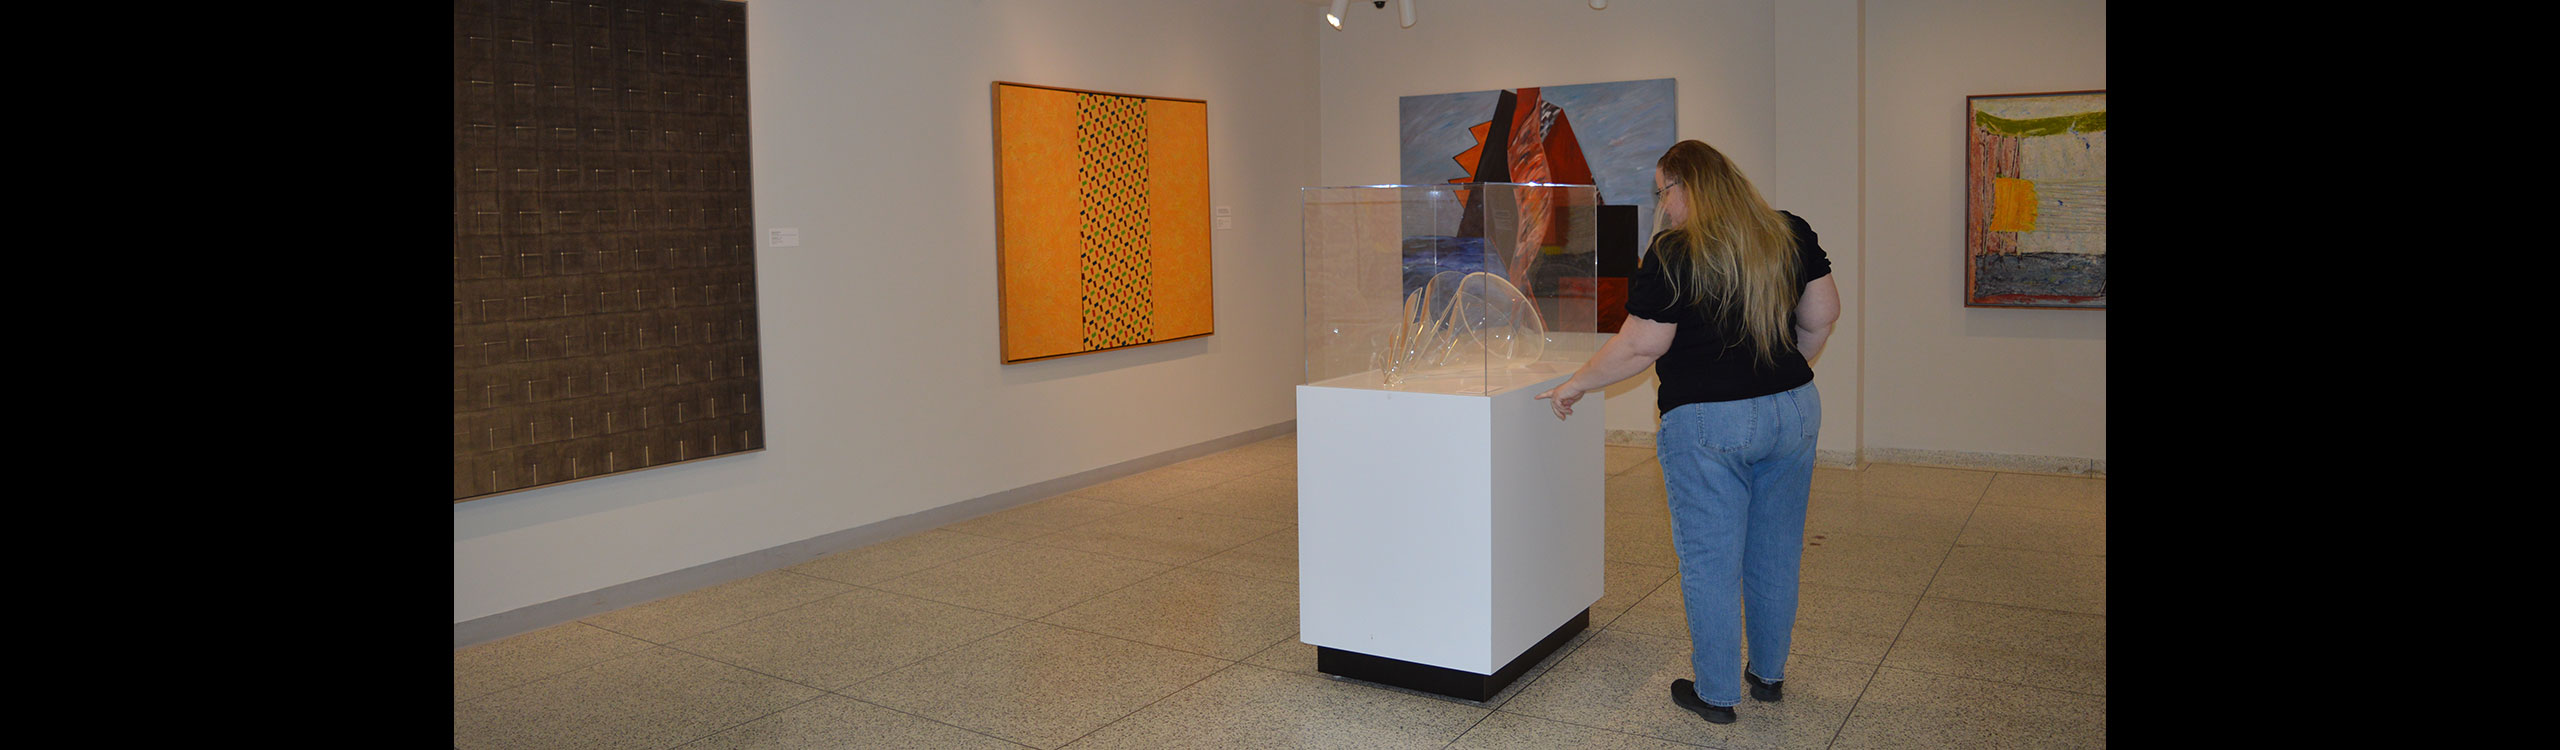 On view now: Beyond the Tangible: Non-objective Abstraction from the Collection